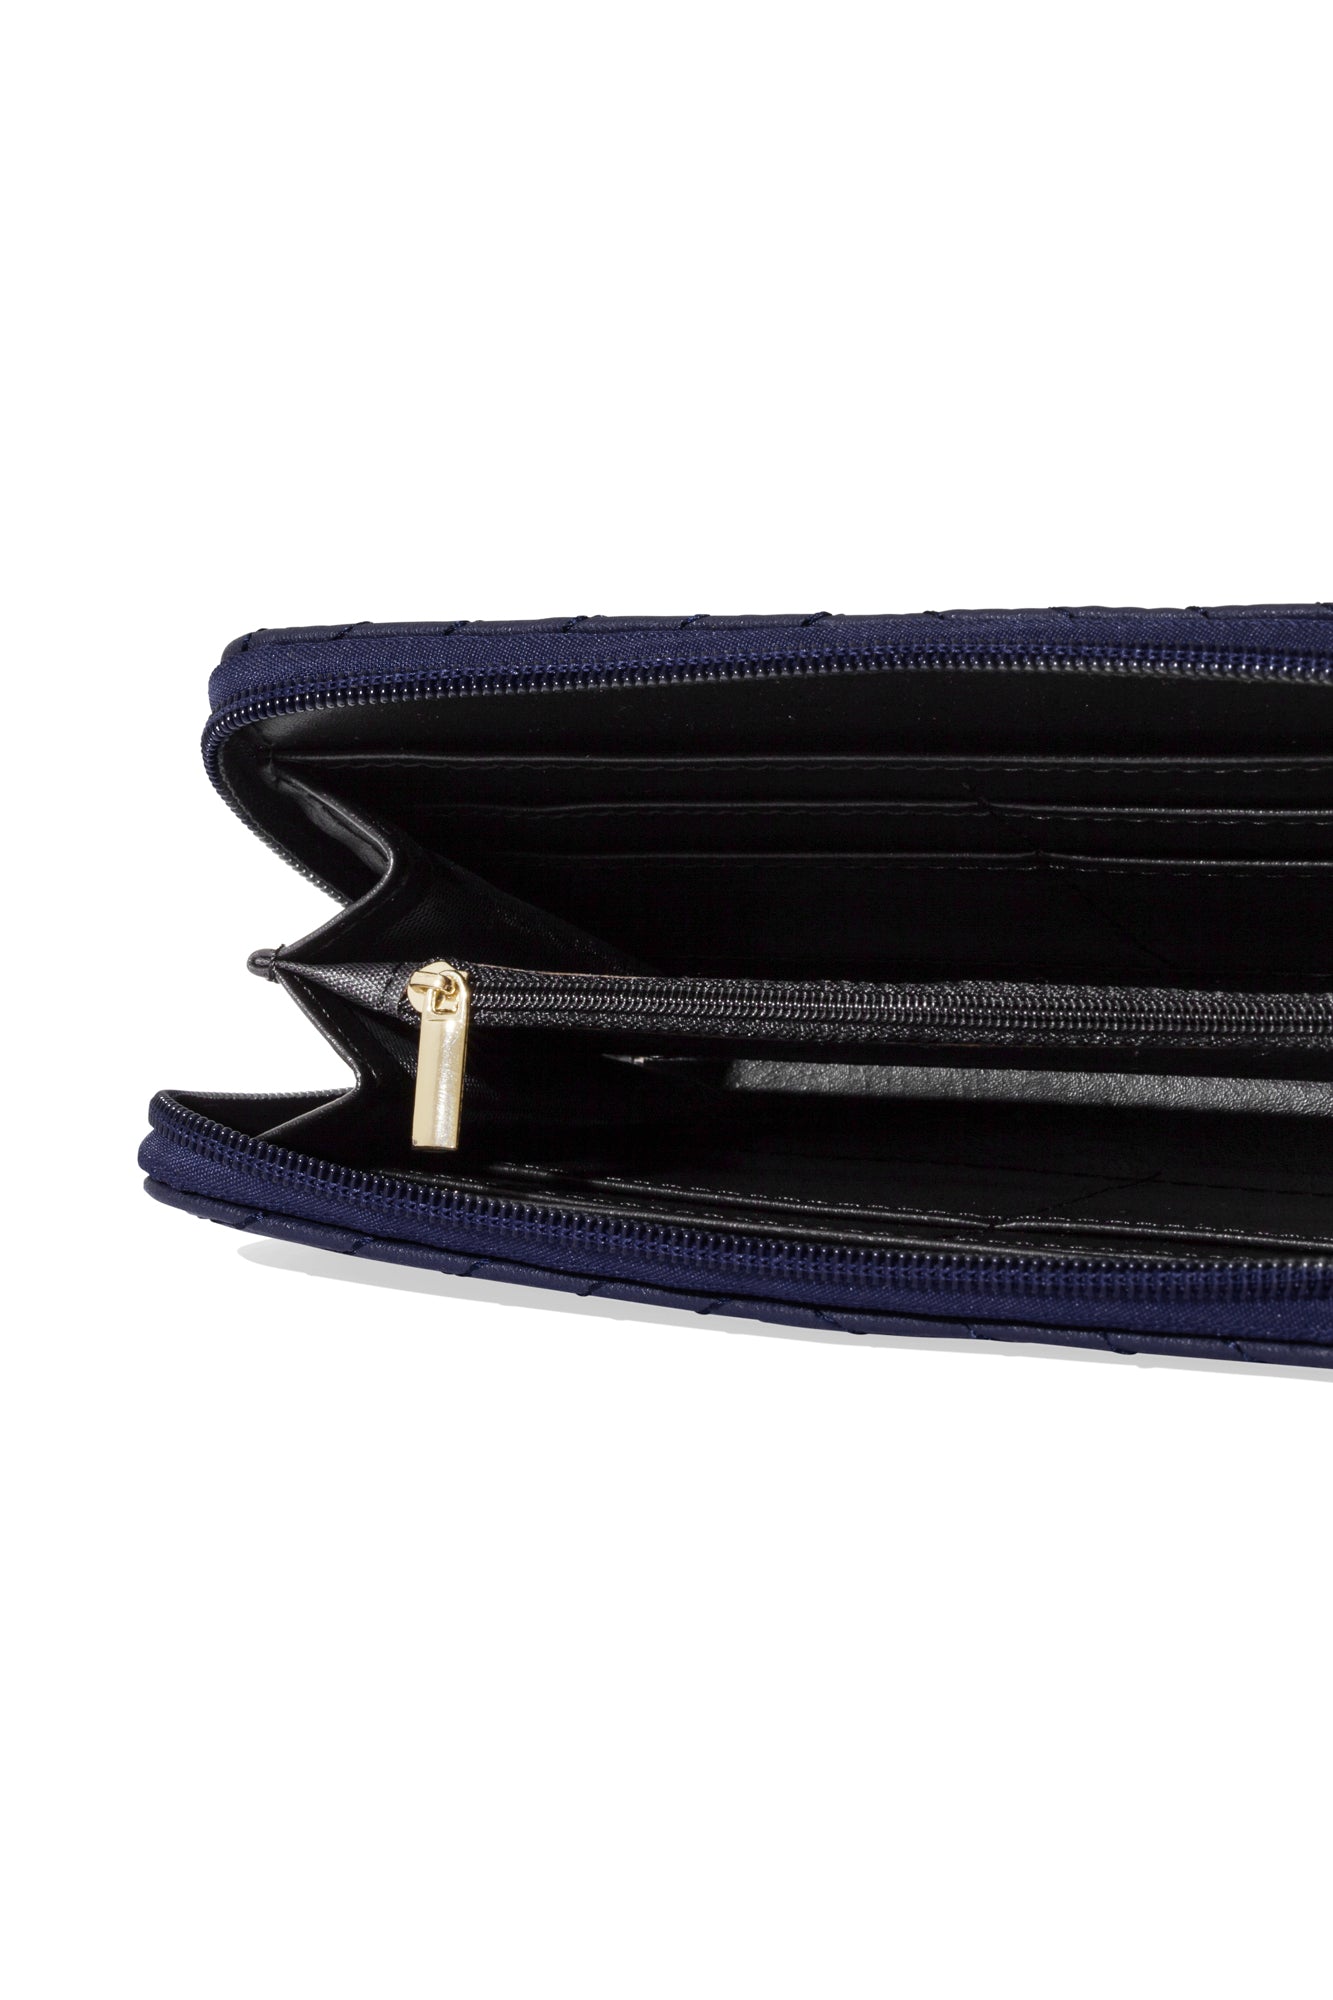 Black interior of navy zippered wallet with gold zipper